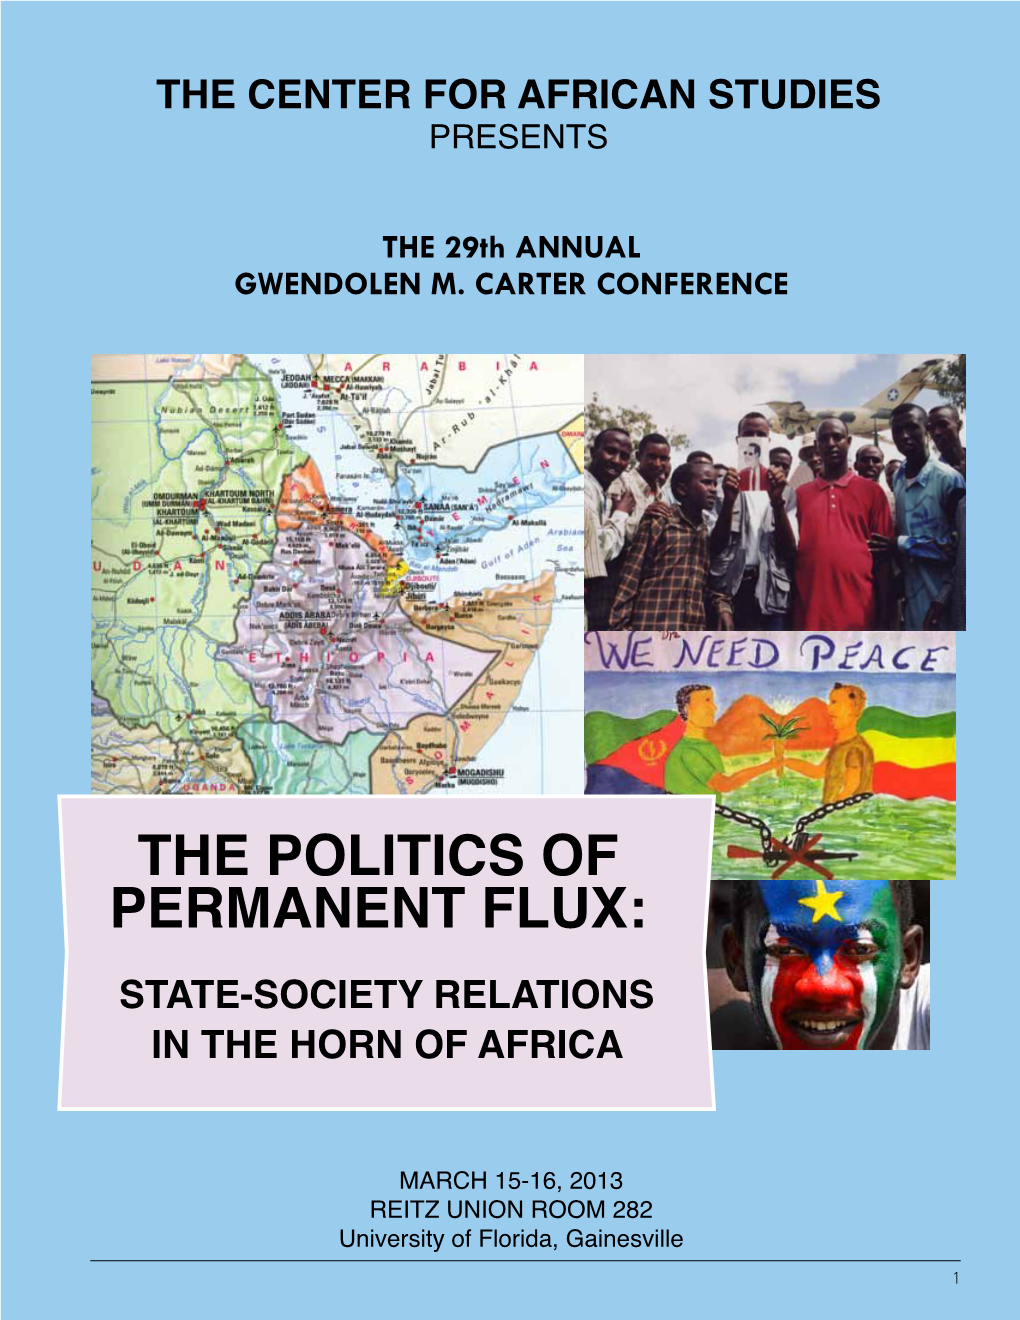 The Politics of Permanent Flux: State-Society Relations in the Horn of Africa